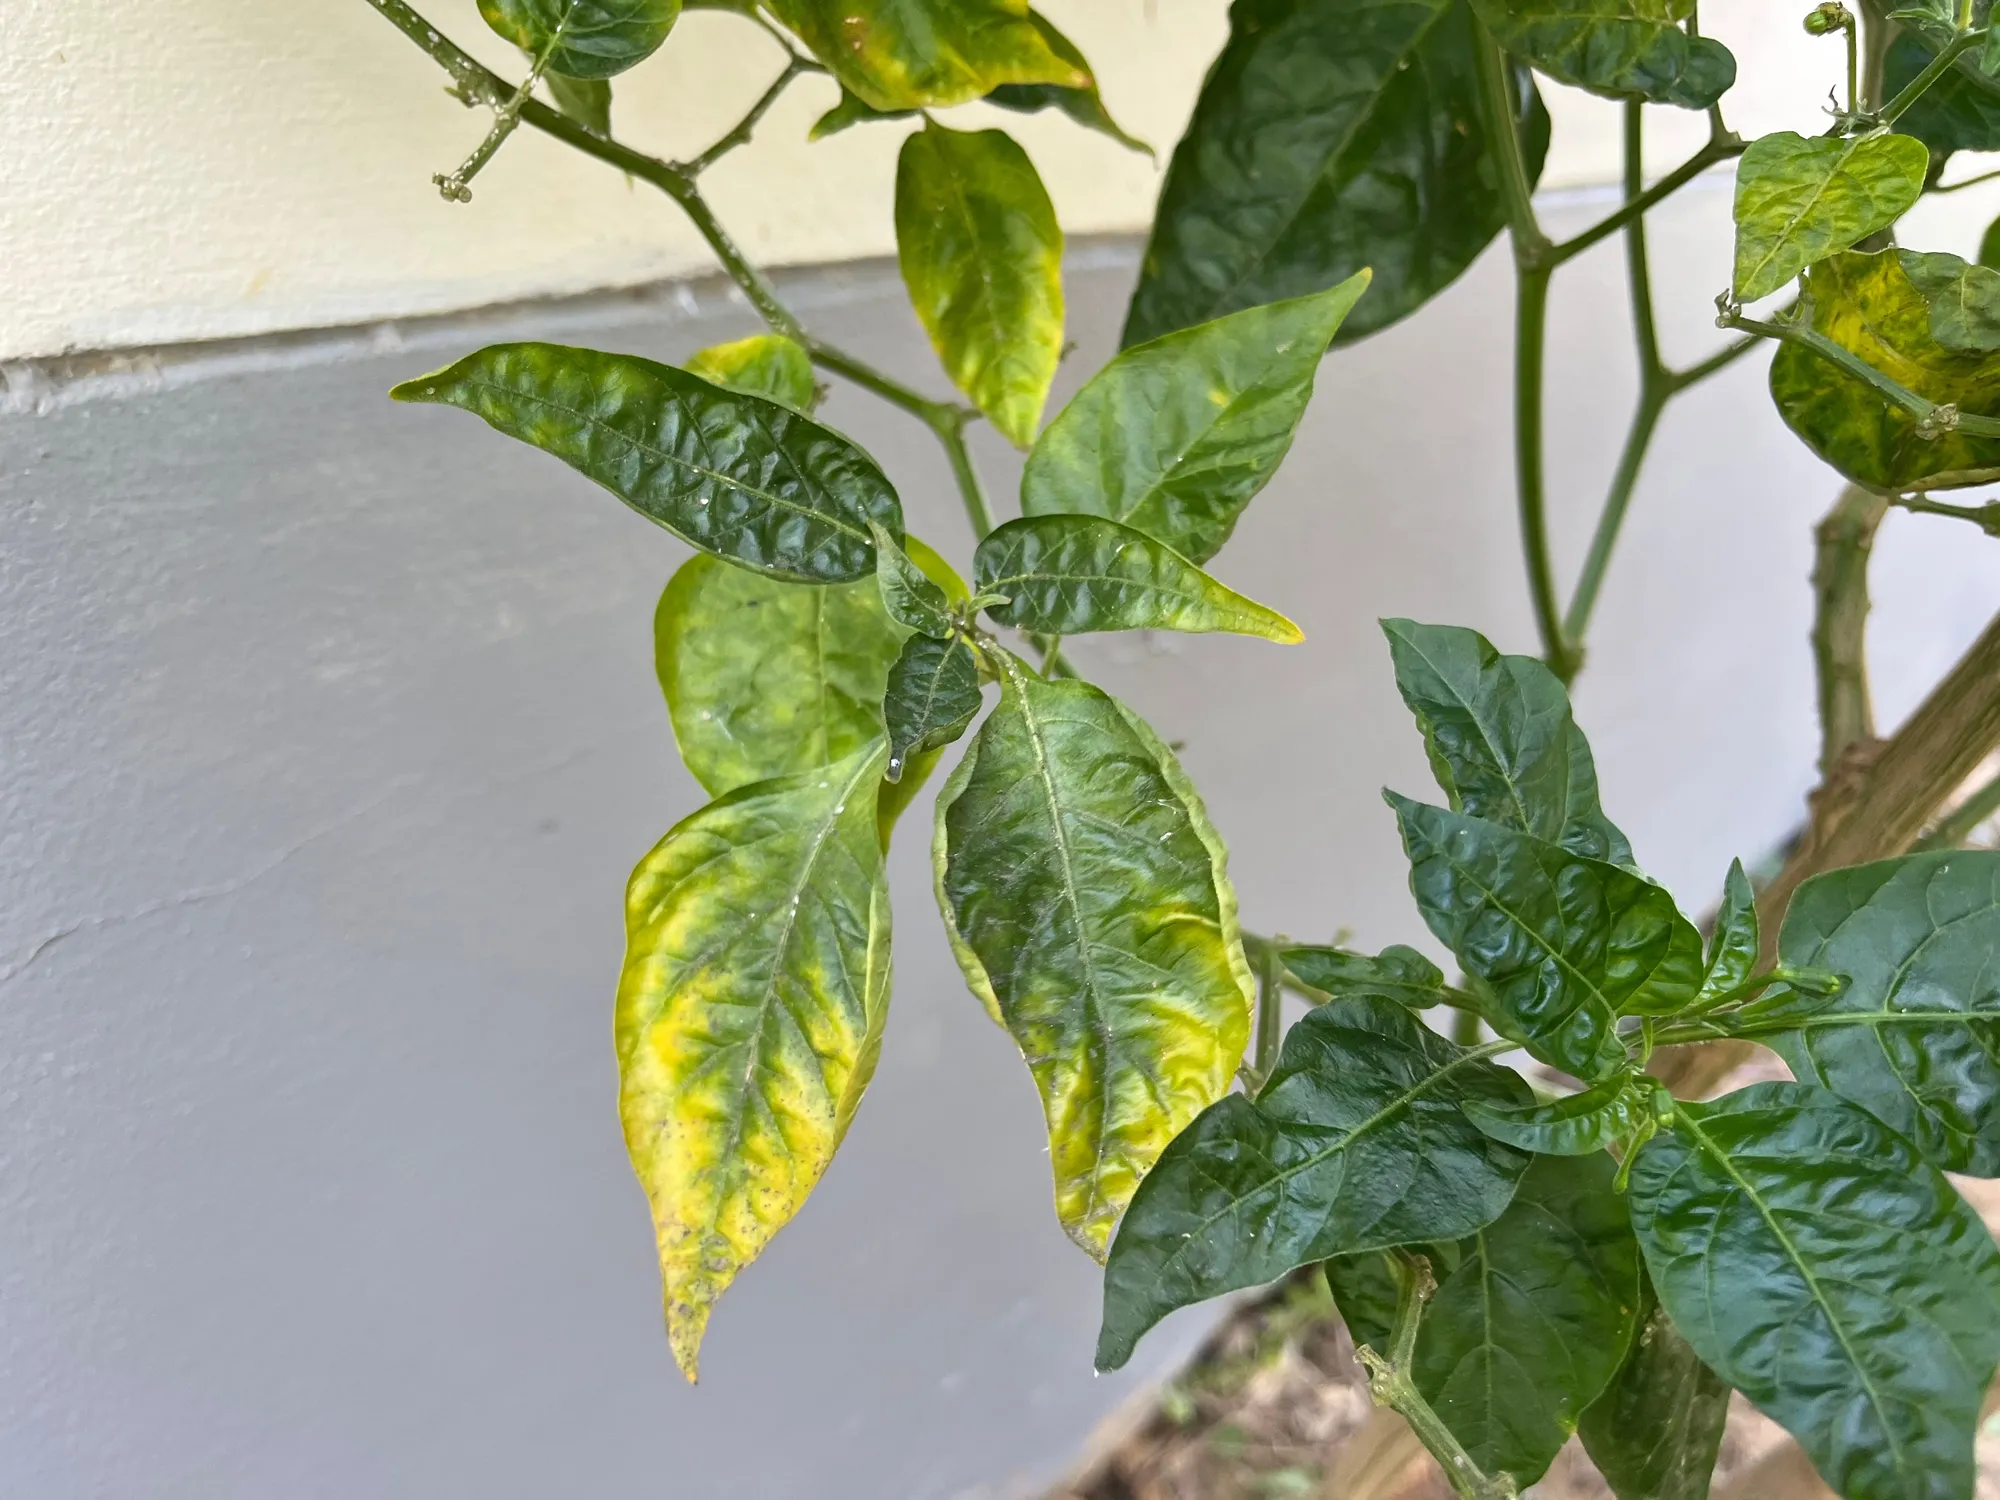 Botryosphaeria canker causes dieback and cankers on chili plant branches.